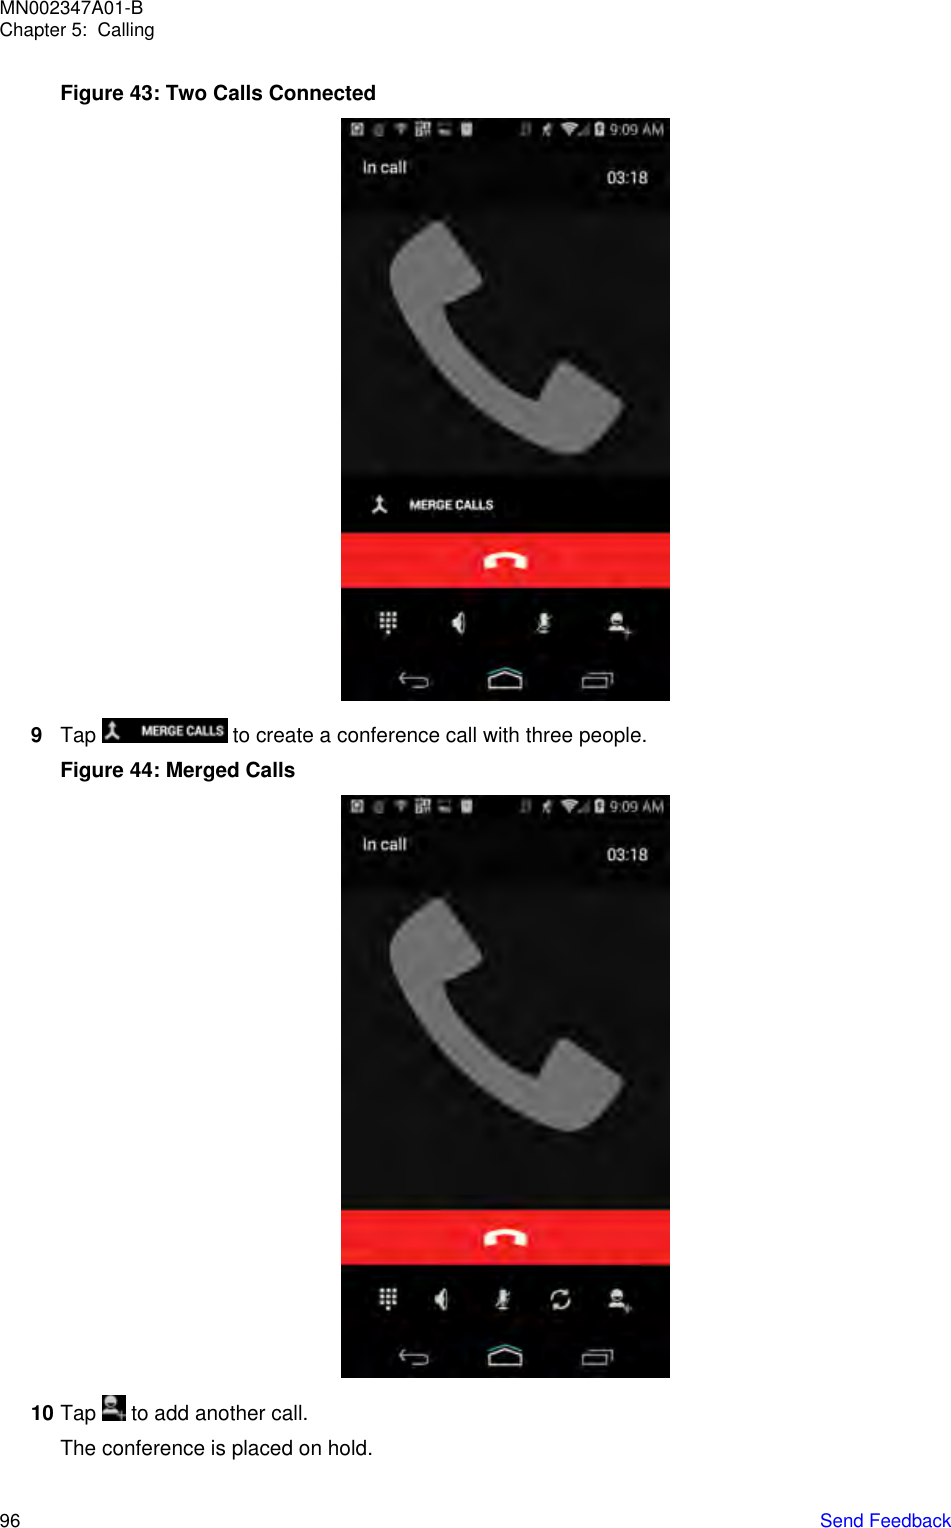 Figure 43: Two Calls Connected9Tap   to create a conference call with three people.Figure 44: Merged Calls10 Tap   to add another call.The conference is placed on hold.MN002347A01-BChapter 5:  Calling96   Send Feedback